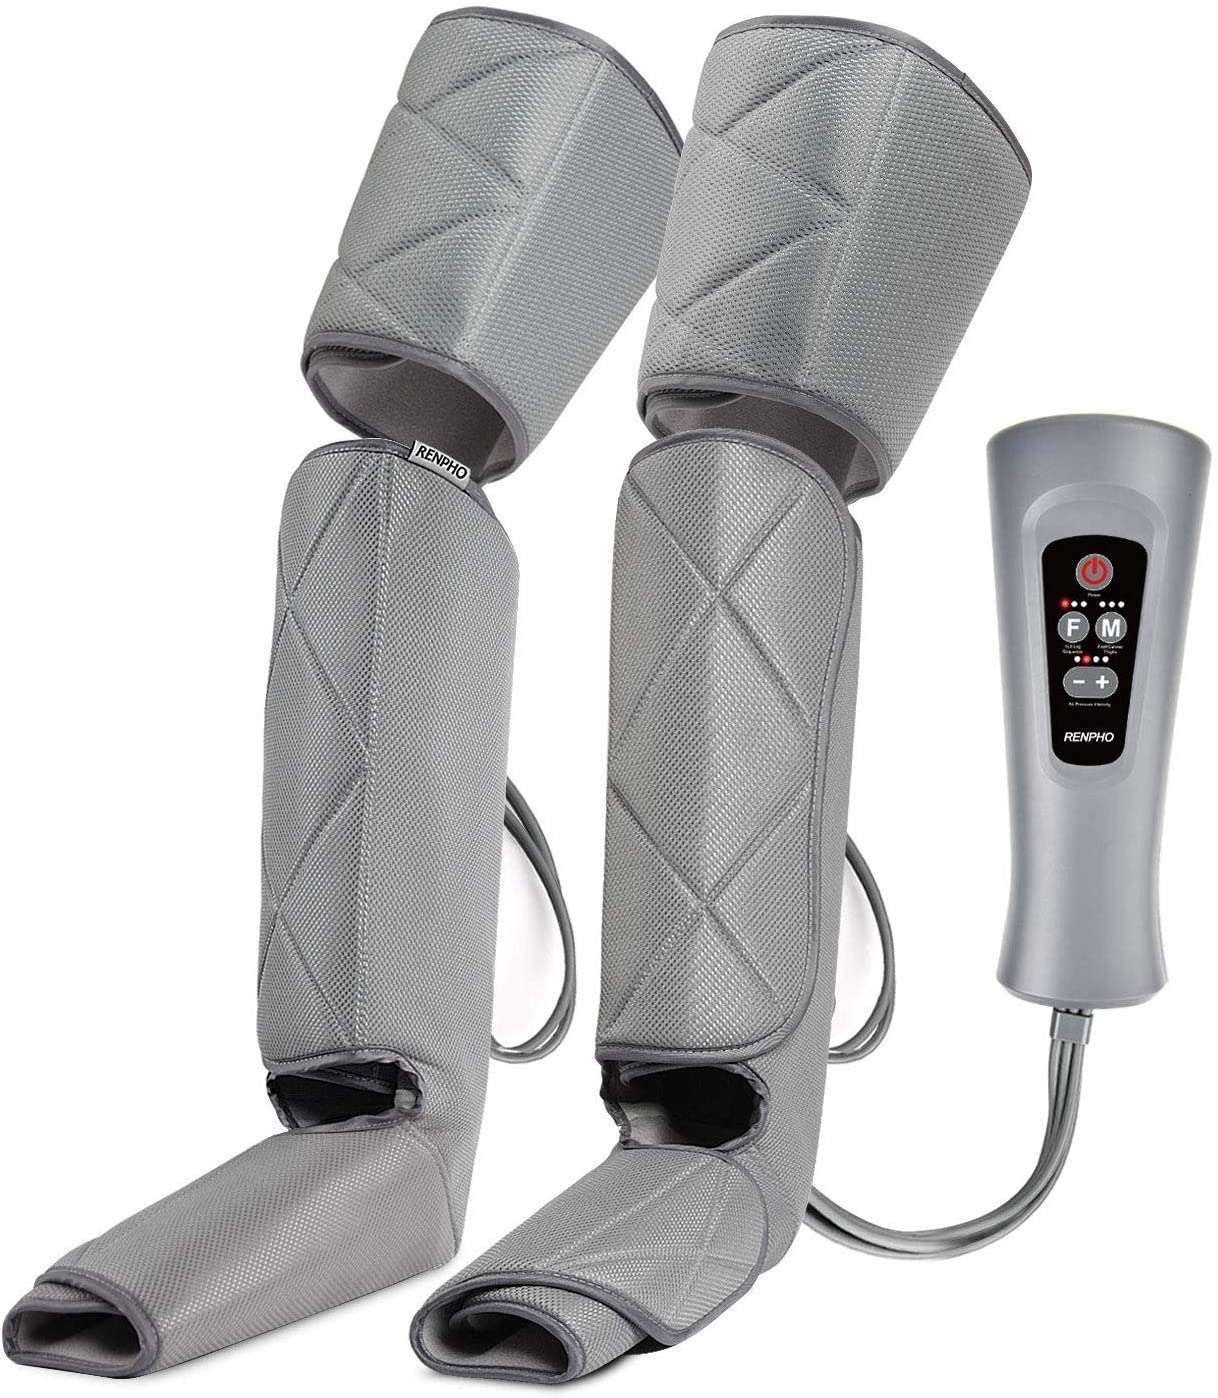 Best Foot Massager for Peripheral Neuropathy